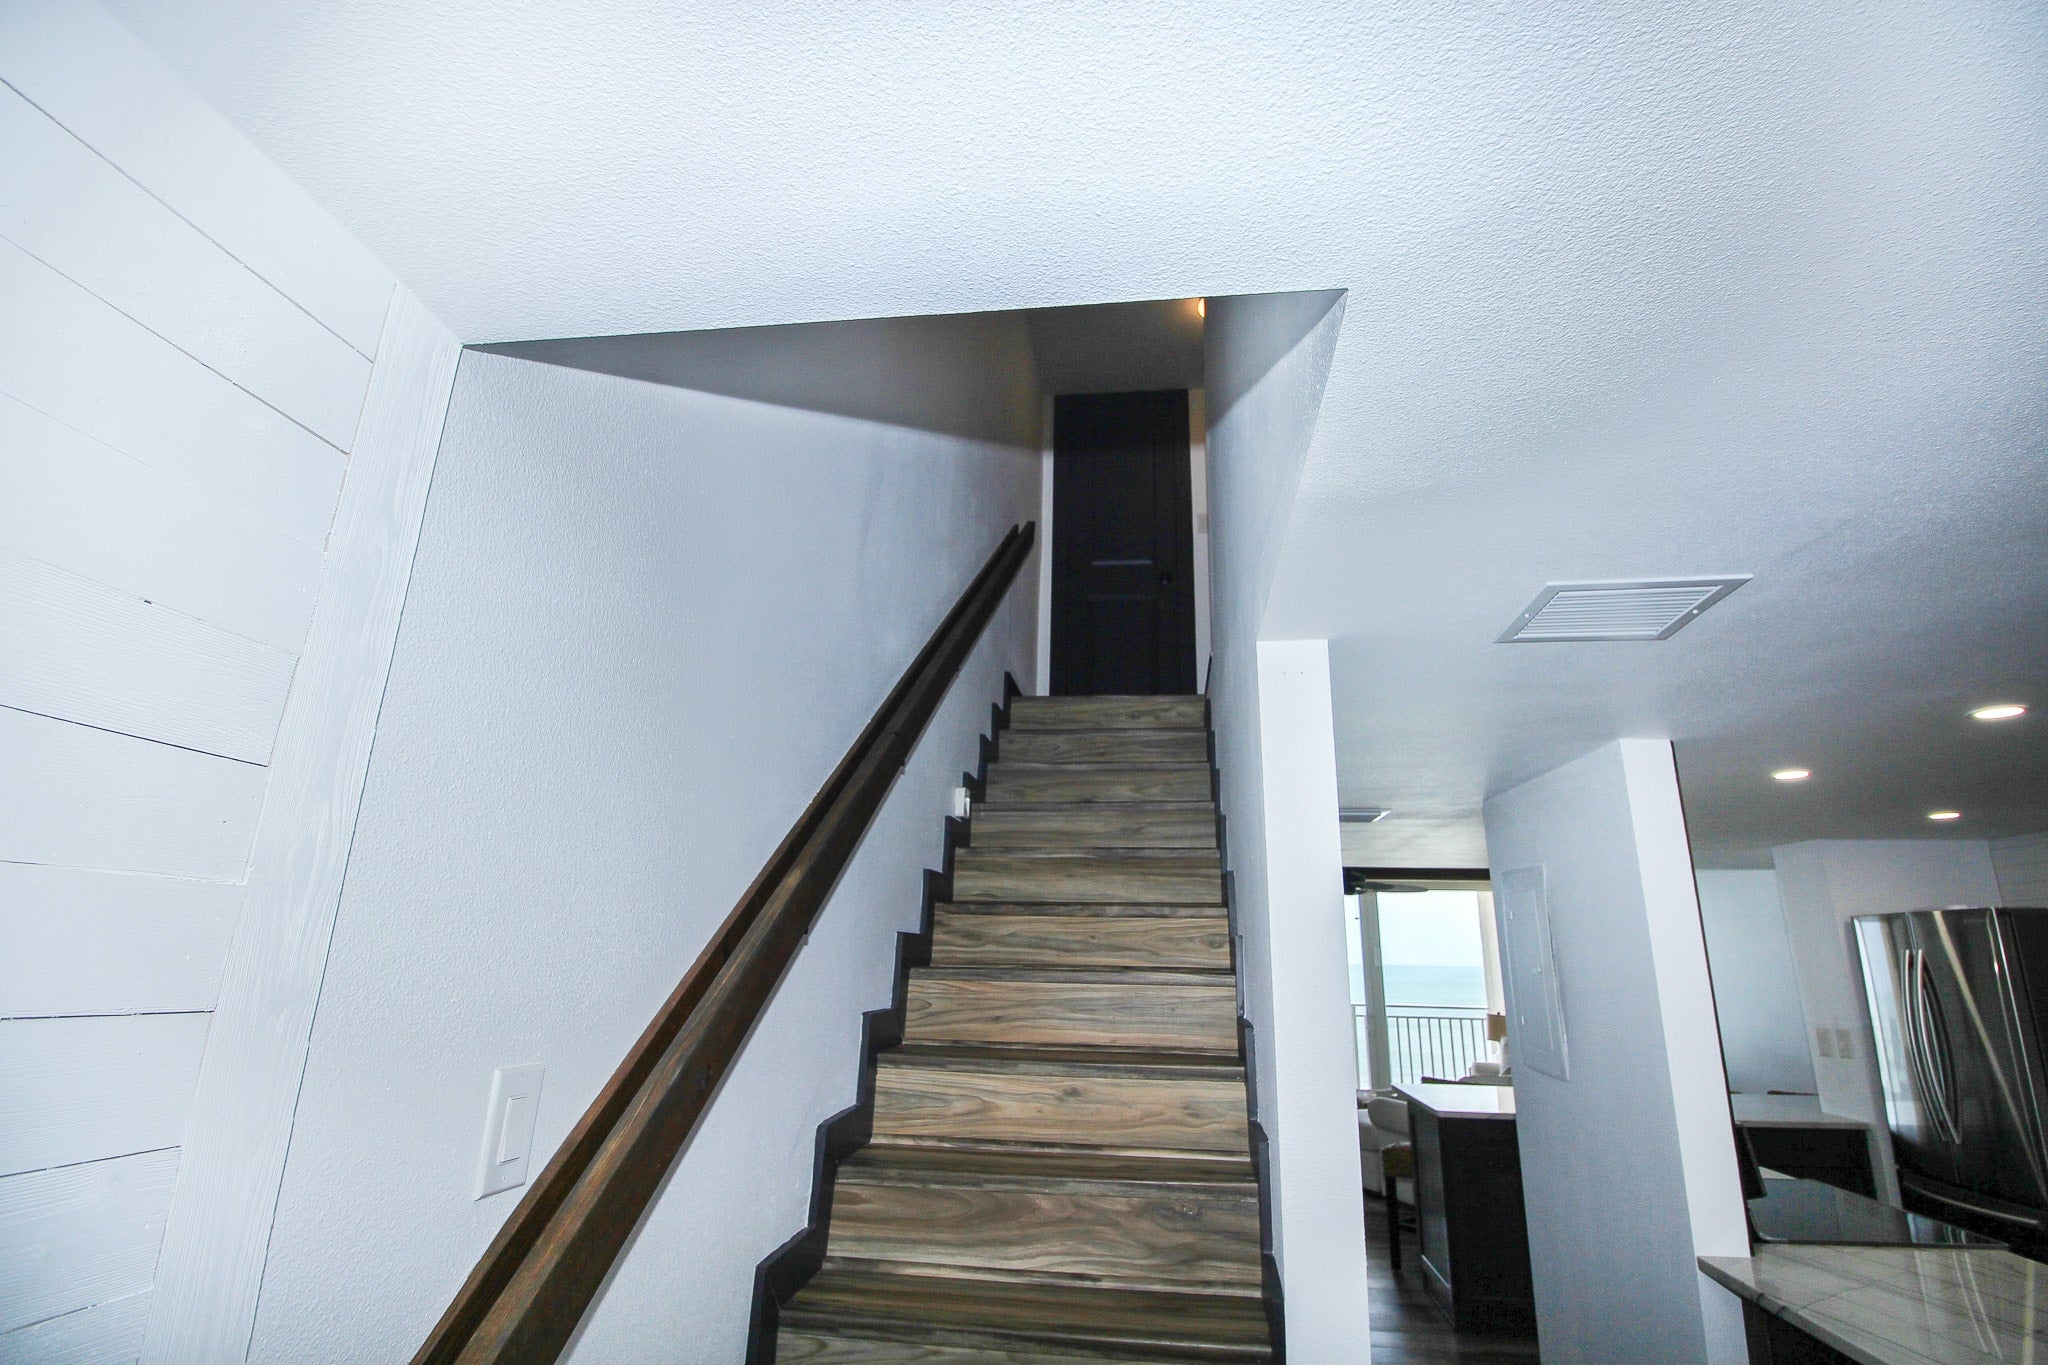 Staircase leads to bedrooms